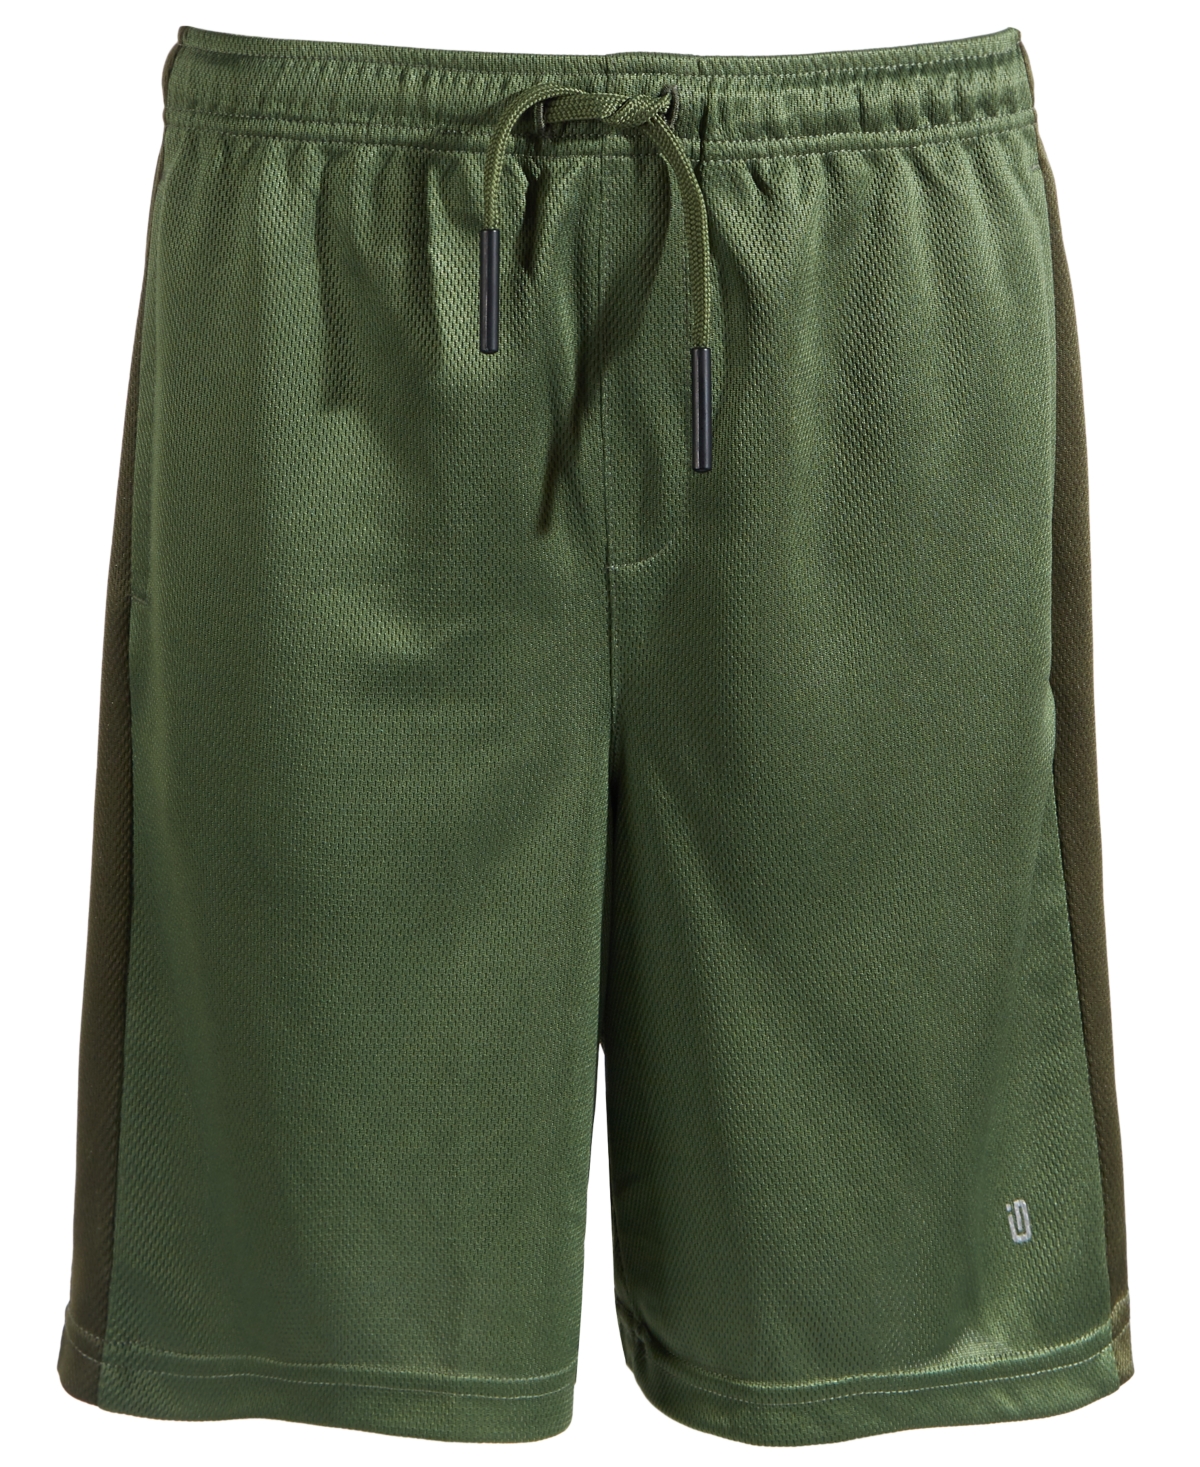 ID IDEOLOGY TODDLER & LITTLE BOYS COLORBLOCKED DRAWSTRING SHORTS, CREATED FOR MACY'S